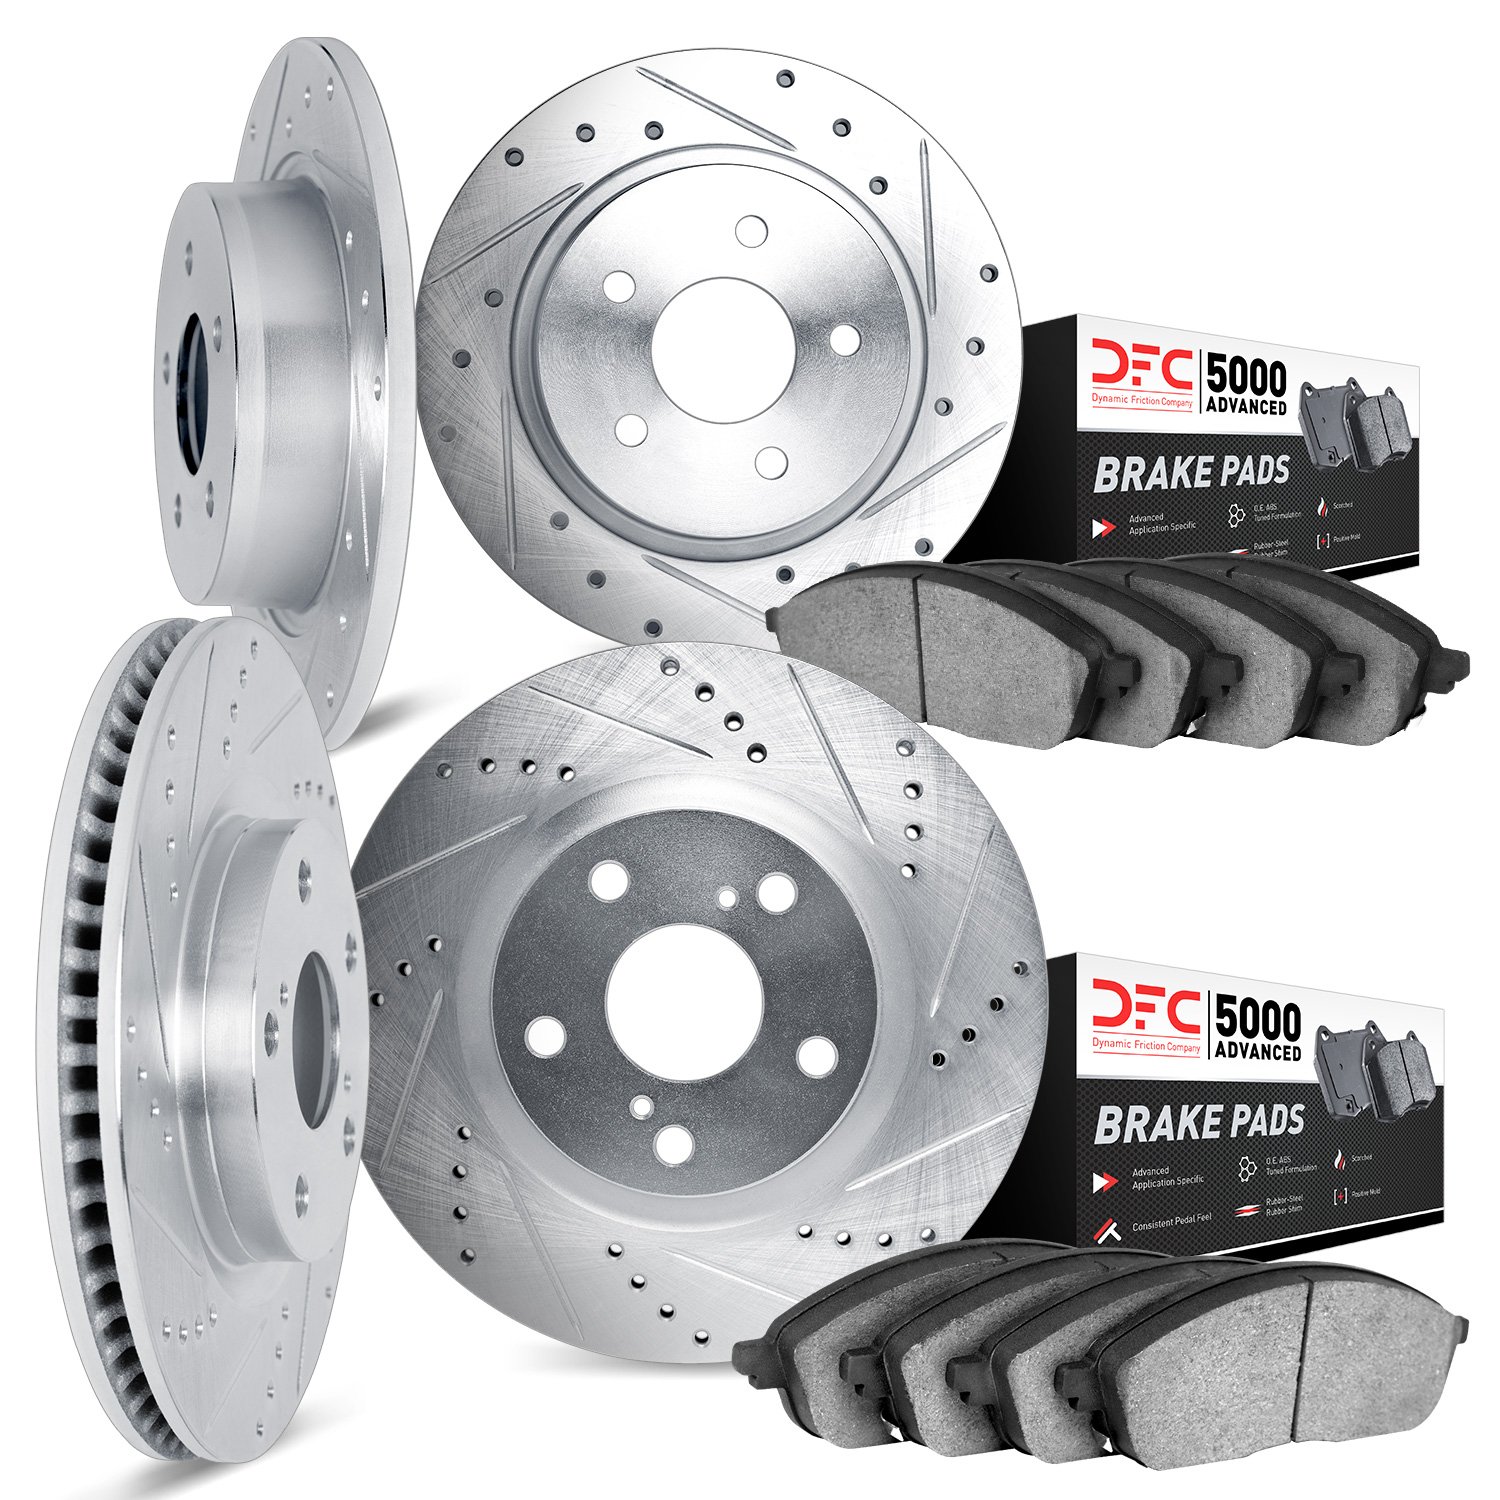 7504-54296 Drilled/Slotted Brake Rotors w/5000 Advanced Brake Pads Kit [Silver], 2013-2020 Ford/Lincoln/Mercury/Mazda, Position: